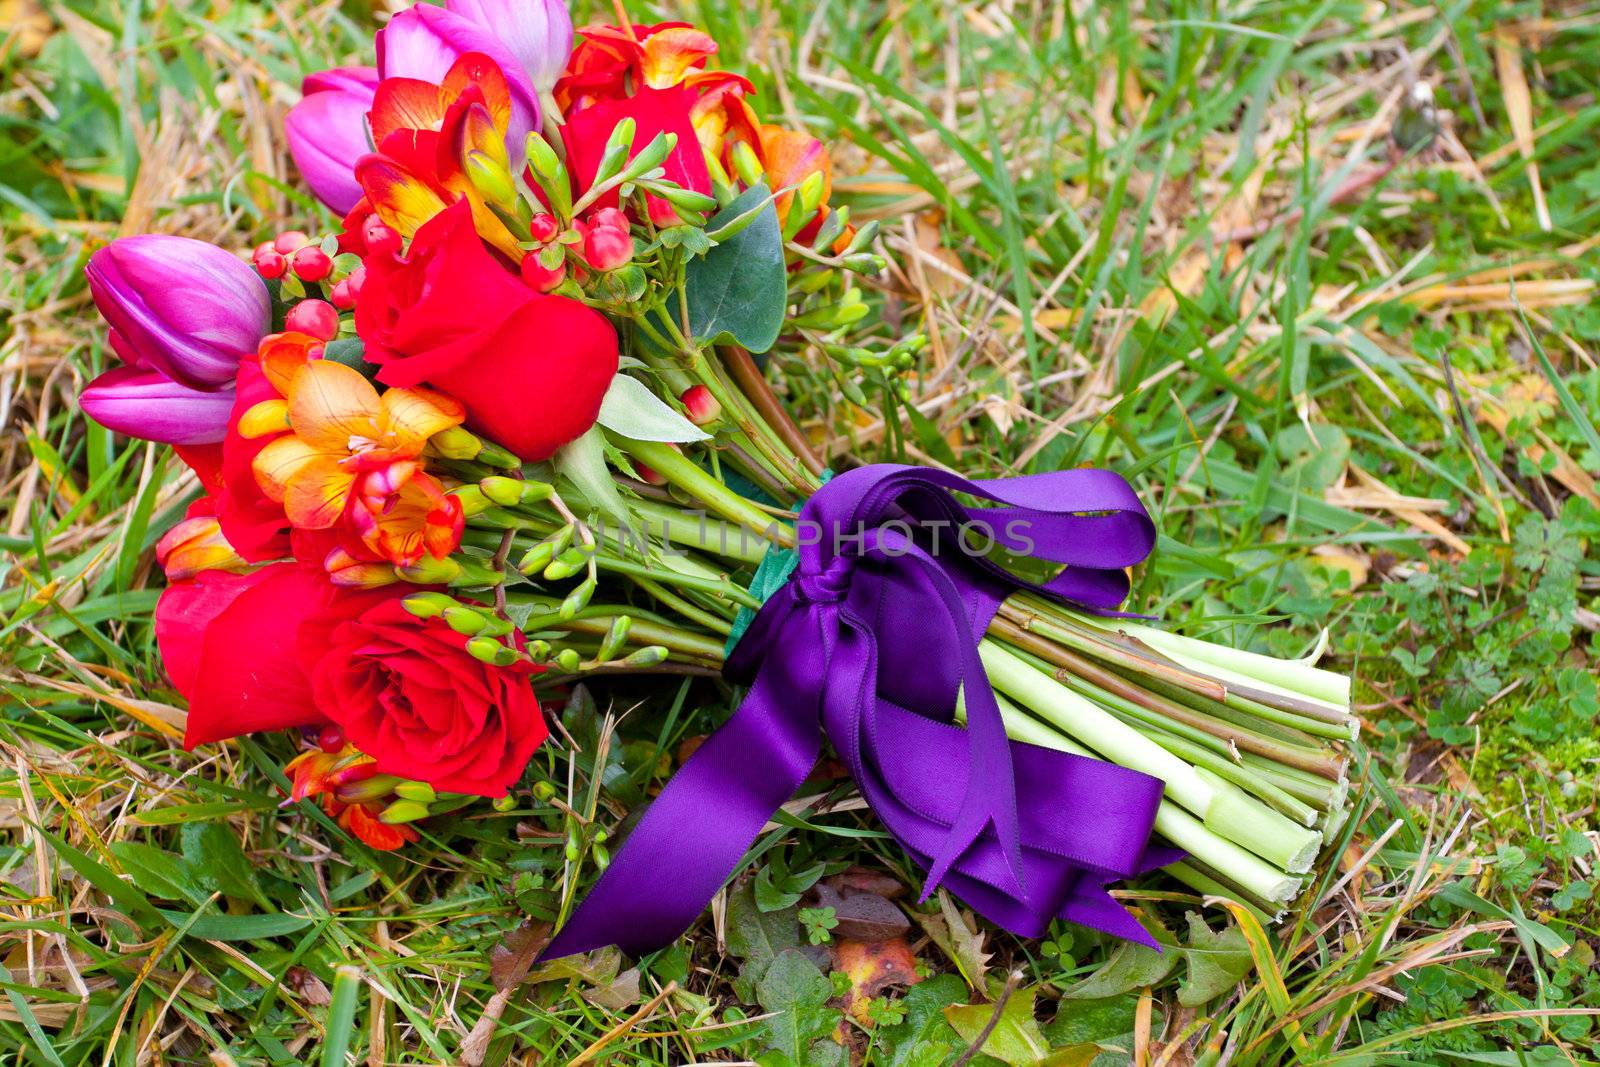 A bride's wedding bouquet of flowers sits in green grass on a wedding day. Red roses, tulips, and purple ribbon make up the arrangement.